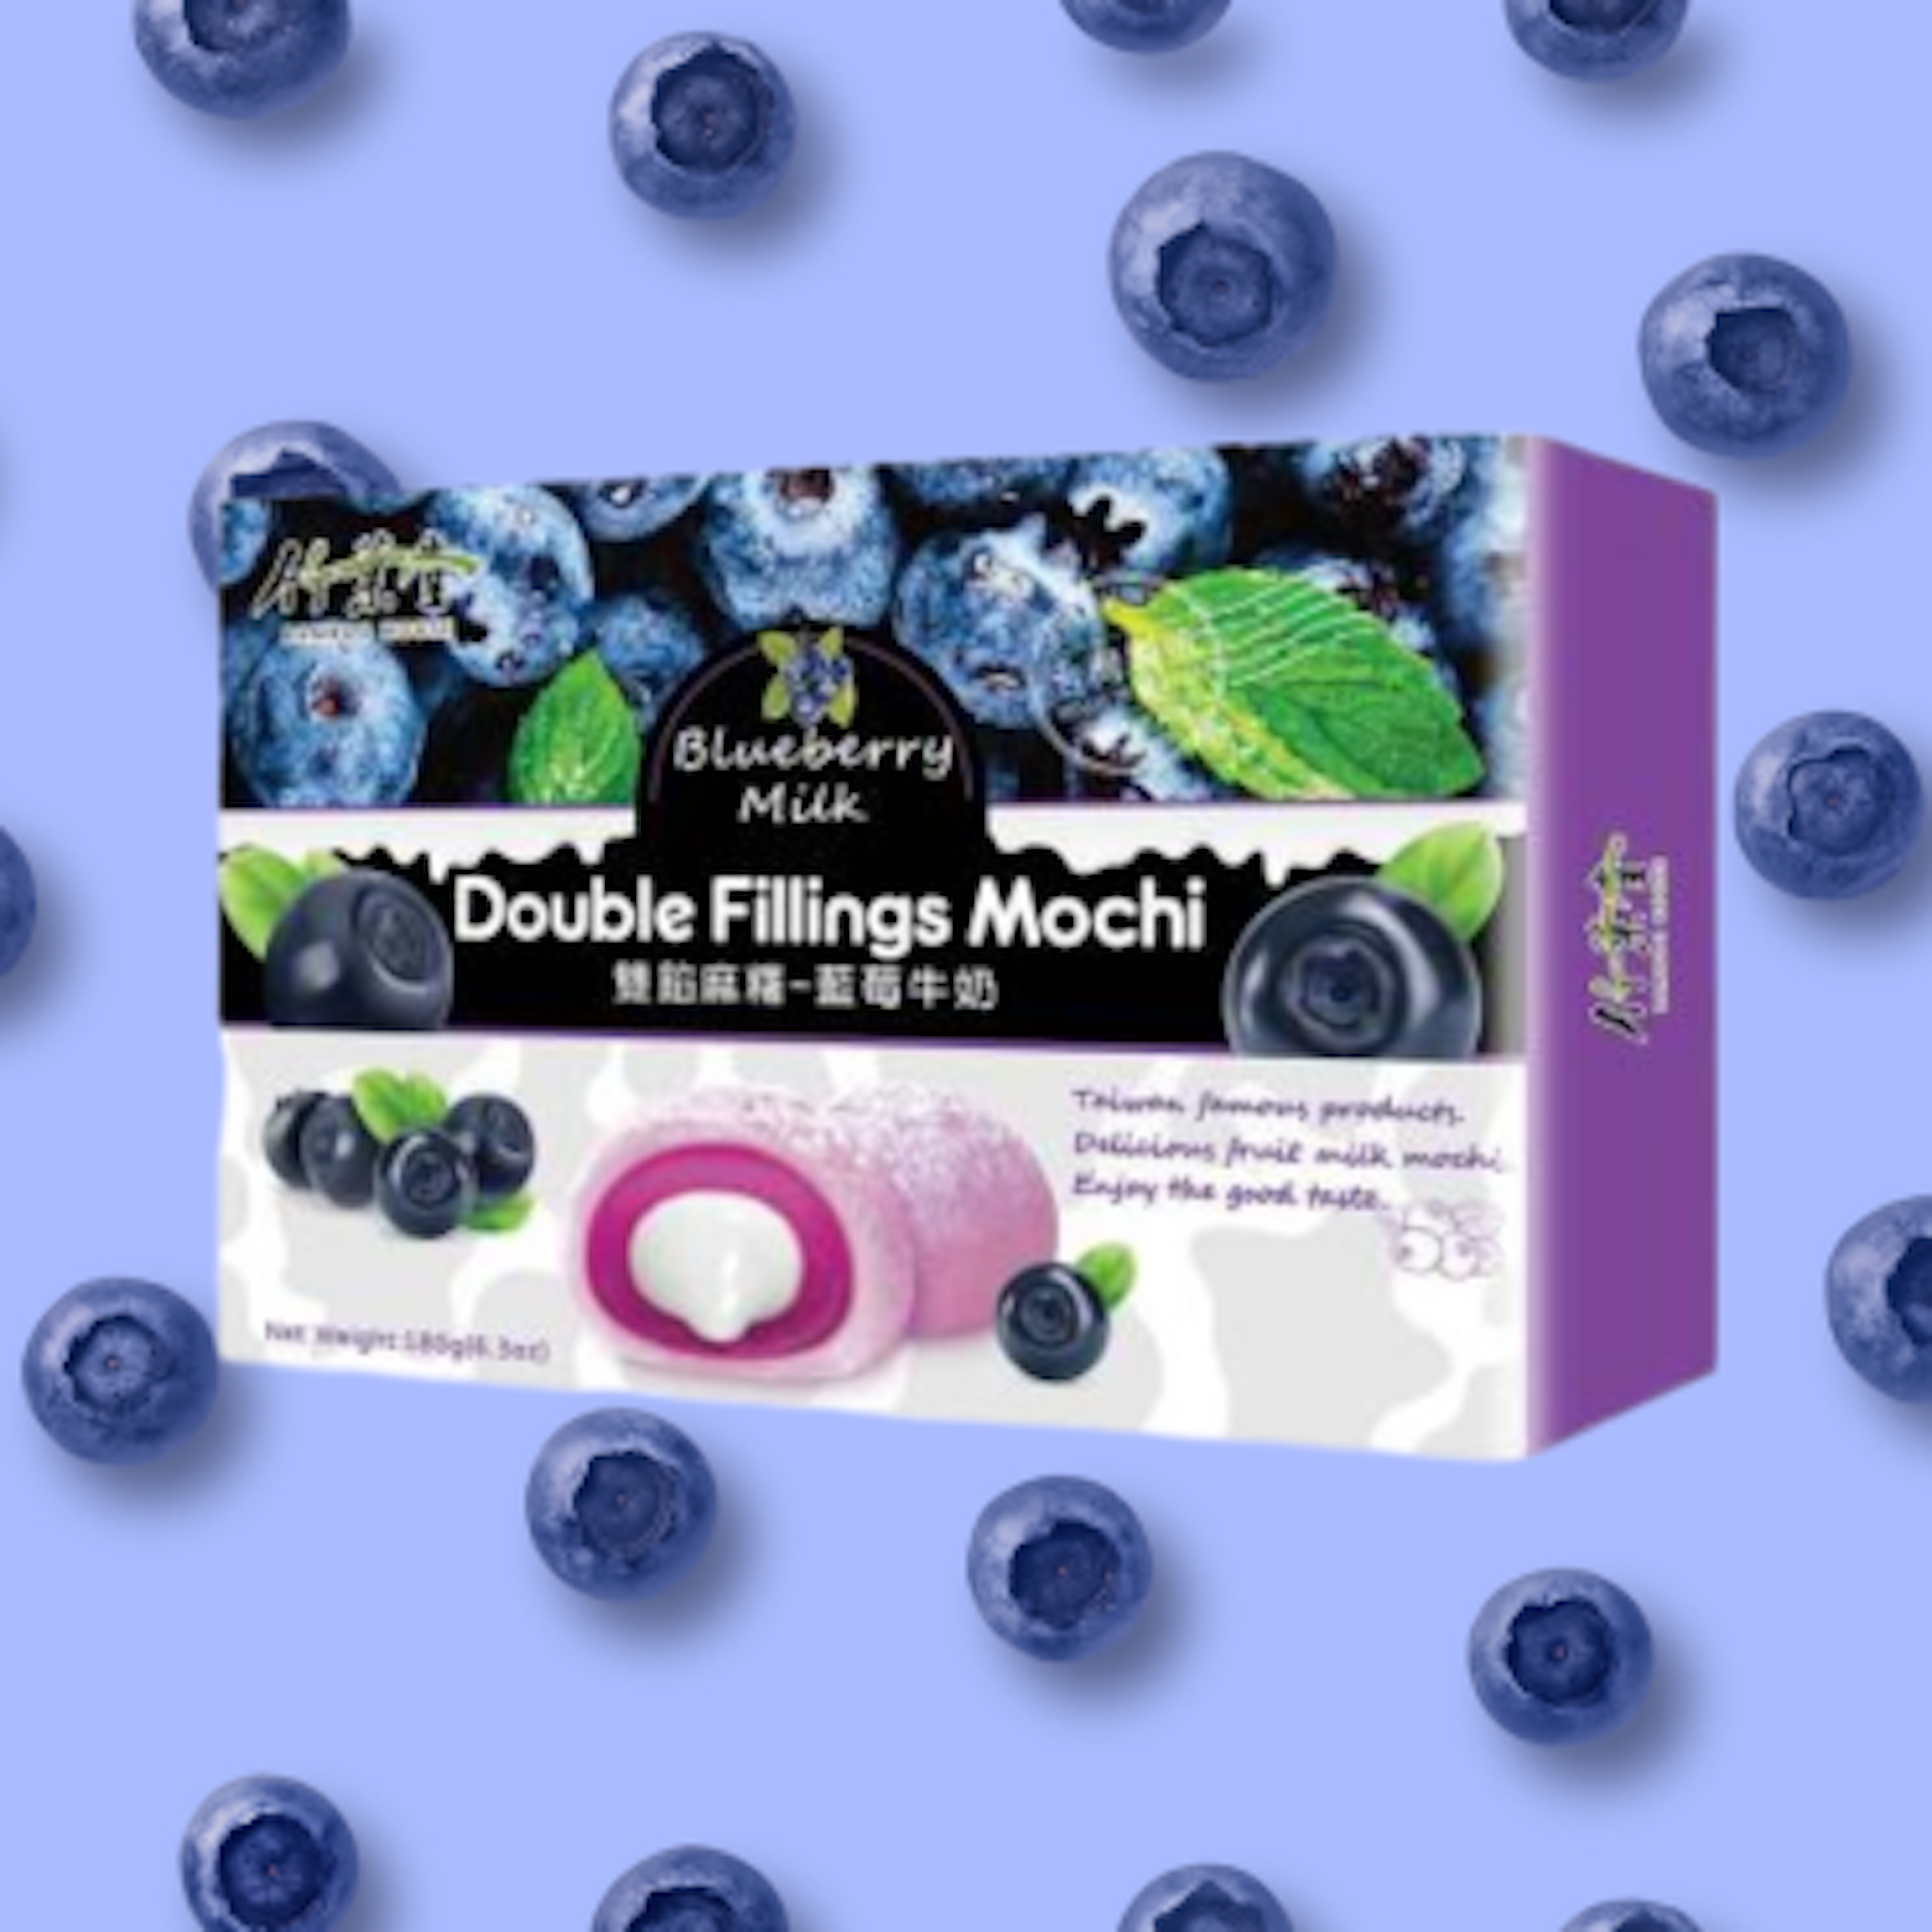 Bamboo House Double Fillings Mochi Blueberry Milk 180g - Delicious and Tender Japanese Sweet